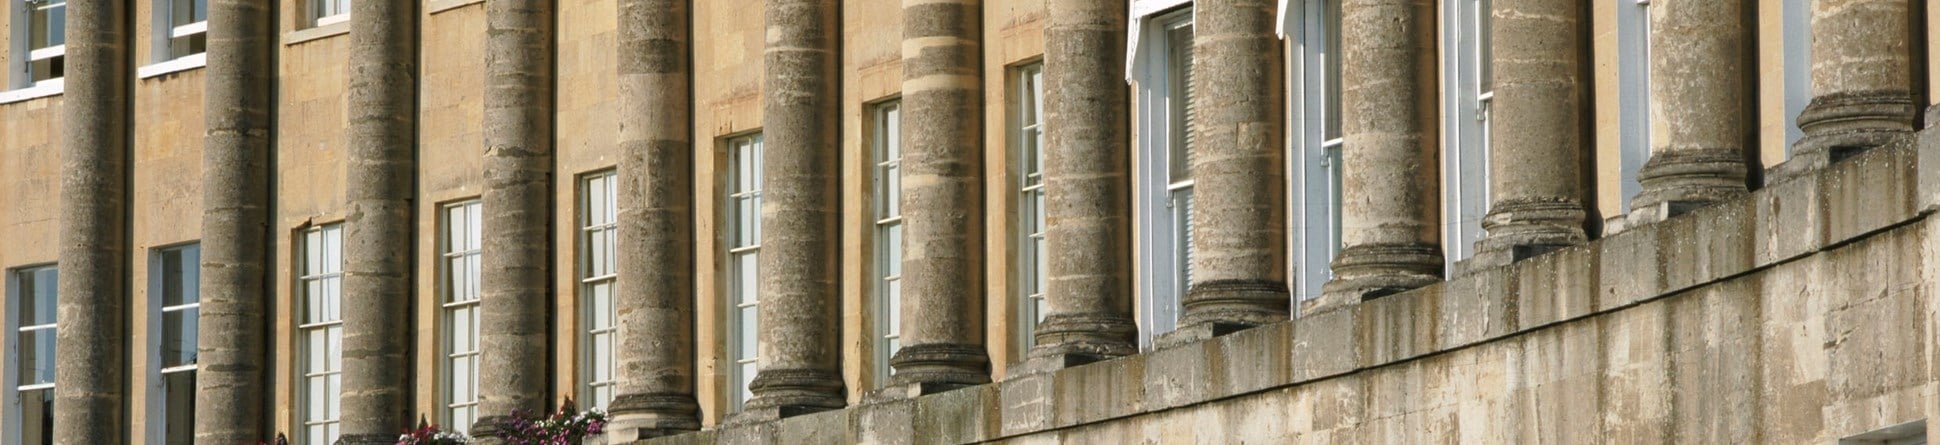 Image of the Royal Crescent in Bath